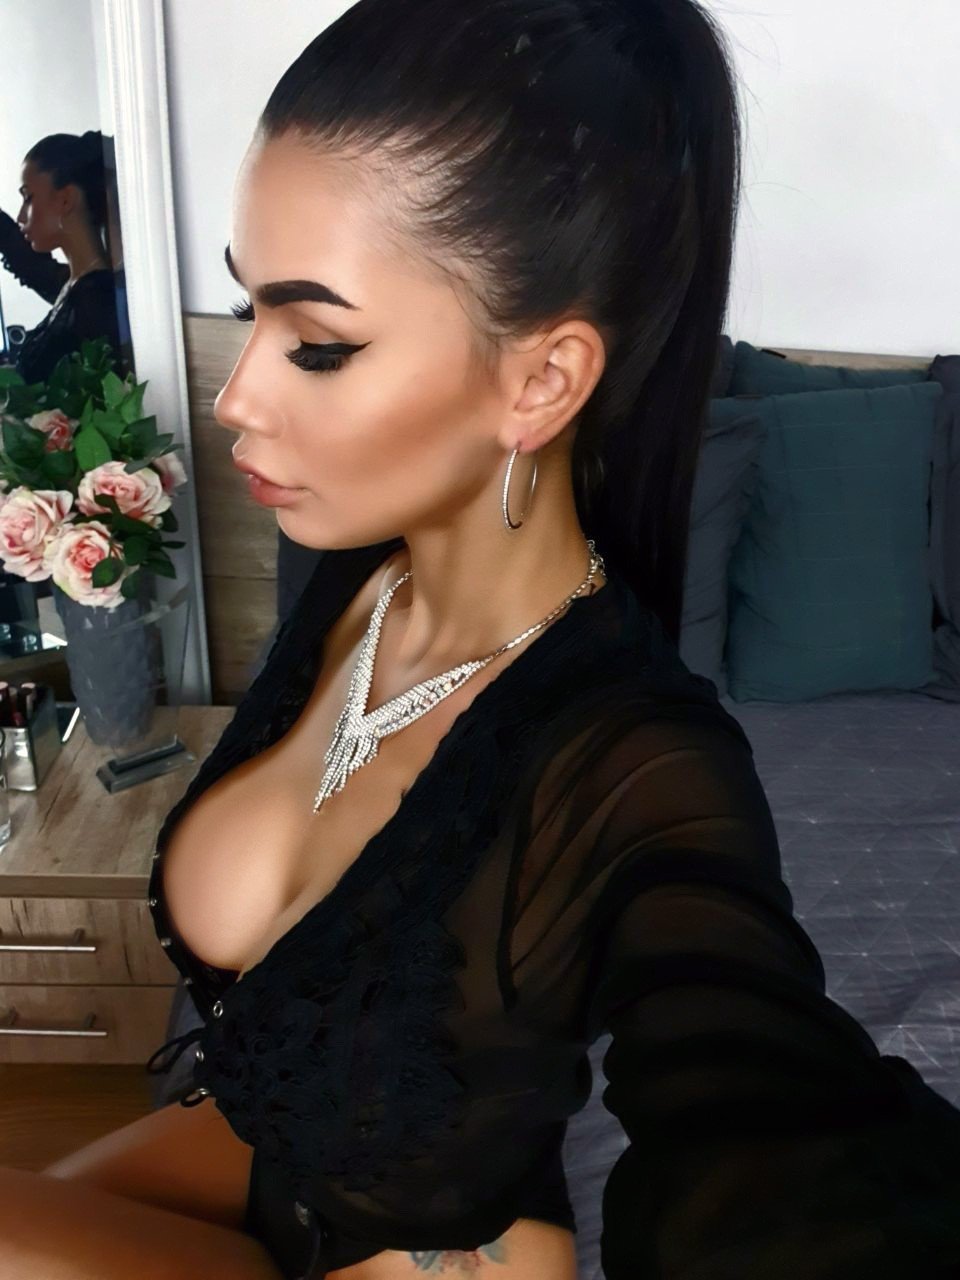 Photo by SereneSophie with the username @SereneSophie, who is a star user,  September 10, 2019 at 6:00 PM. The post is about the topic #TittyTuesday and the text says '#TuesdayMotivation #tittytuesday #LiveShow

I think I'm ready💄👠💋!
The📹show is about to start soon @ http://bit.ly/SereneSophie😁'